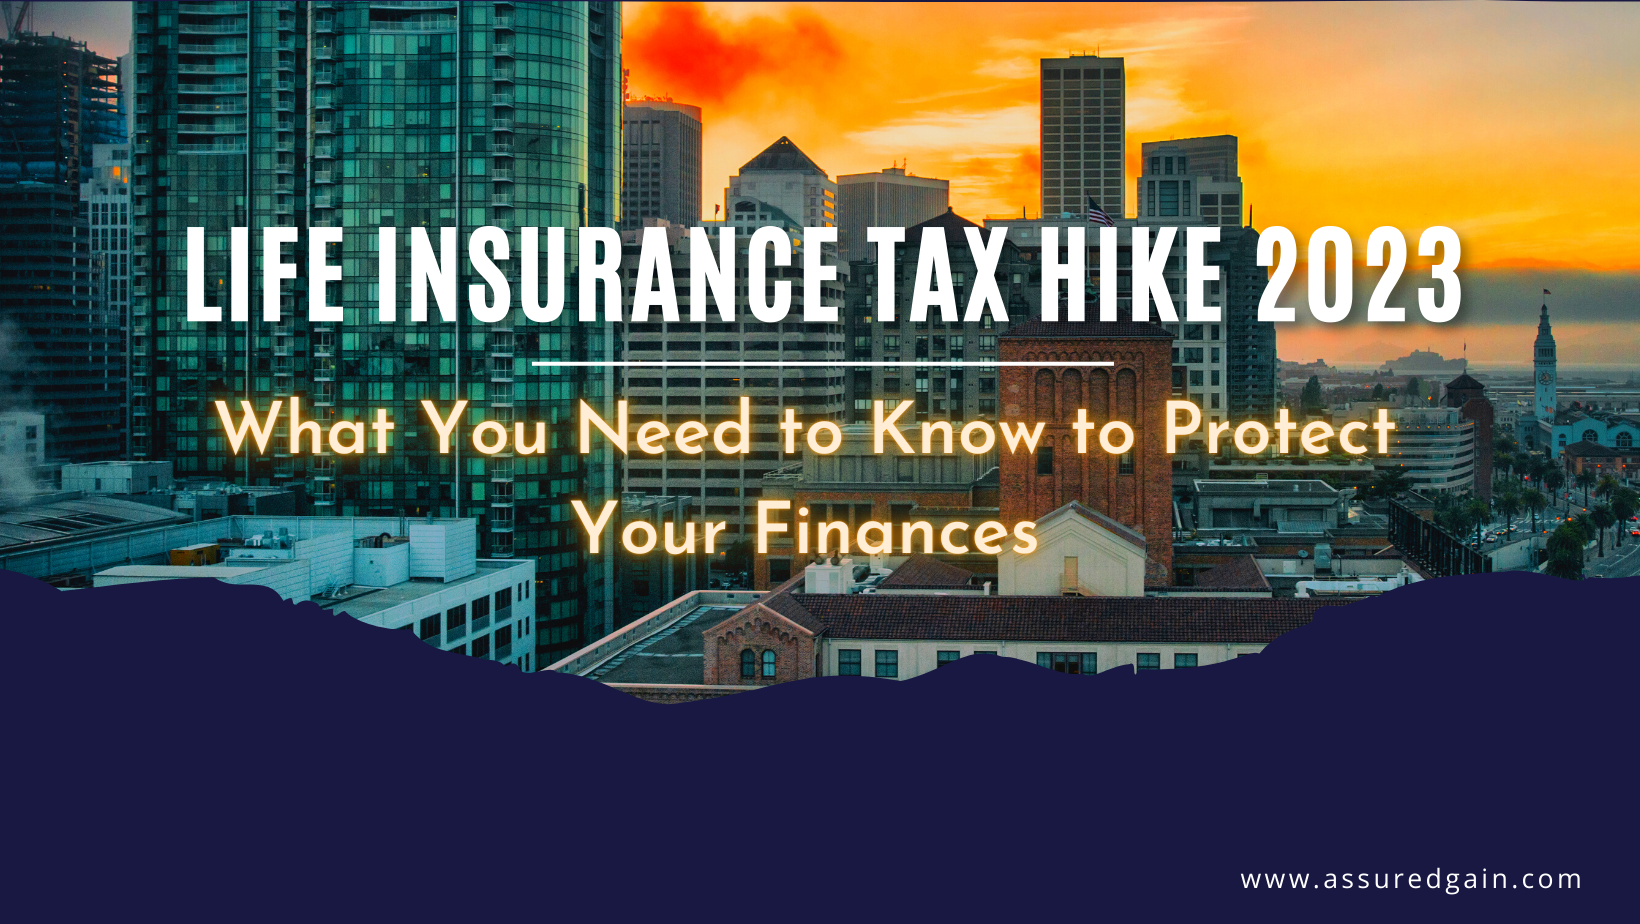 life-insurance-tax-hike-2023-what-you-need-to-know-to-protect-your